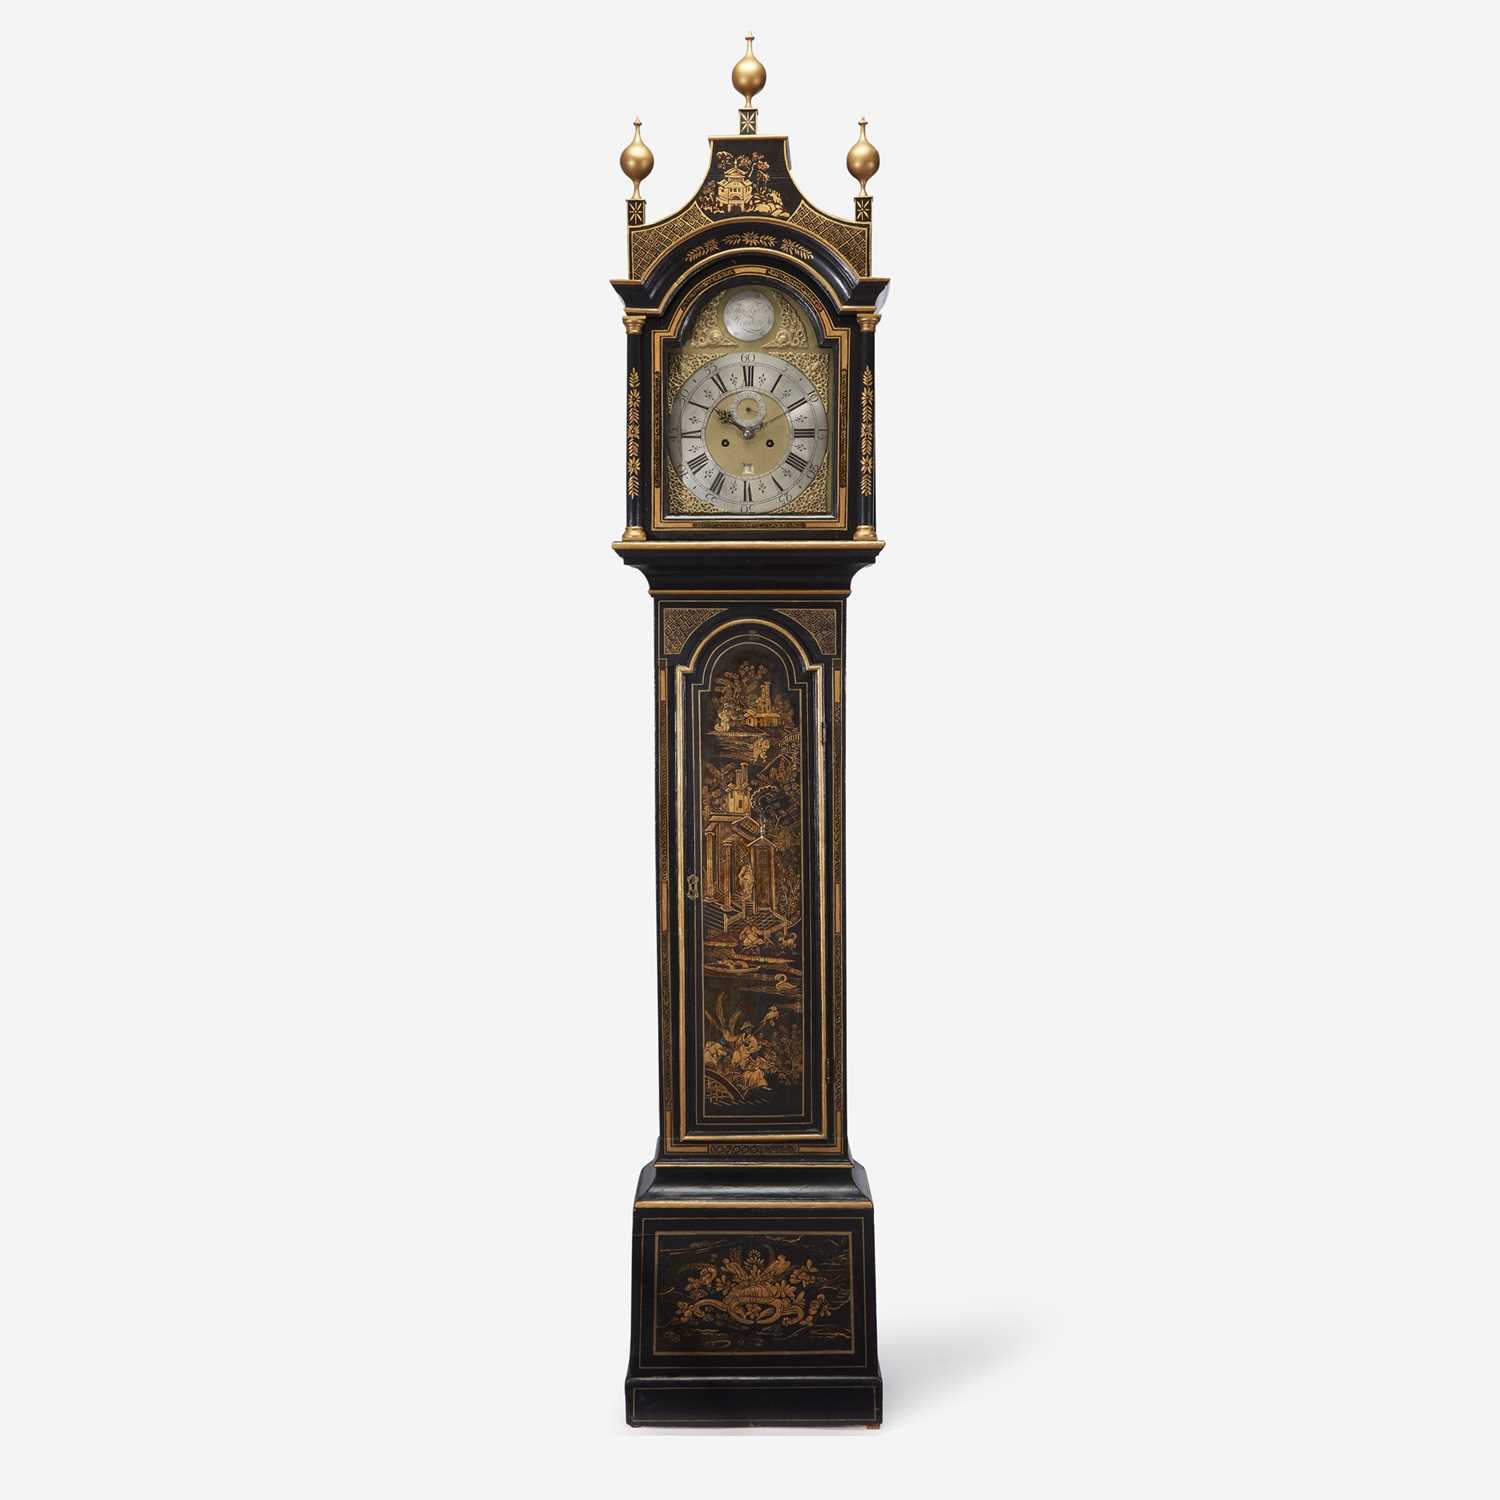 Lot 97 - A George III Japanned Tall Case Clock